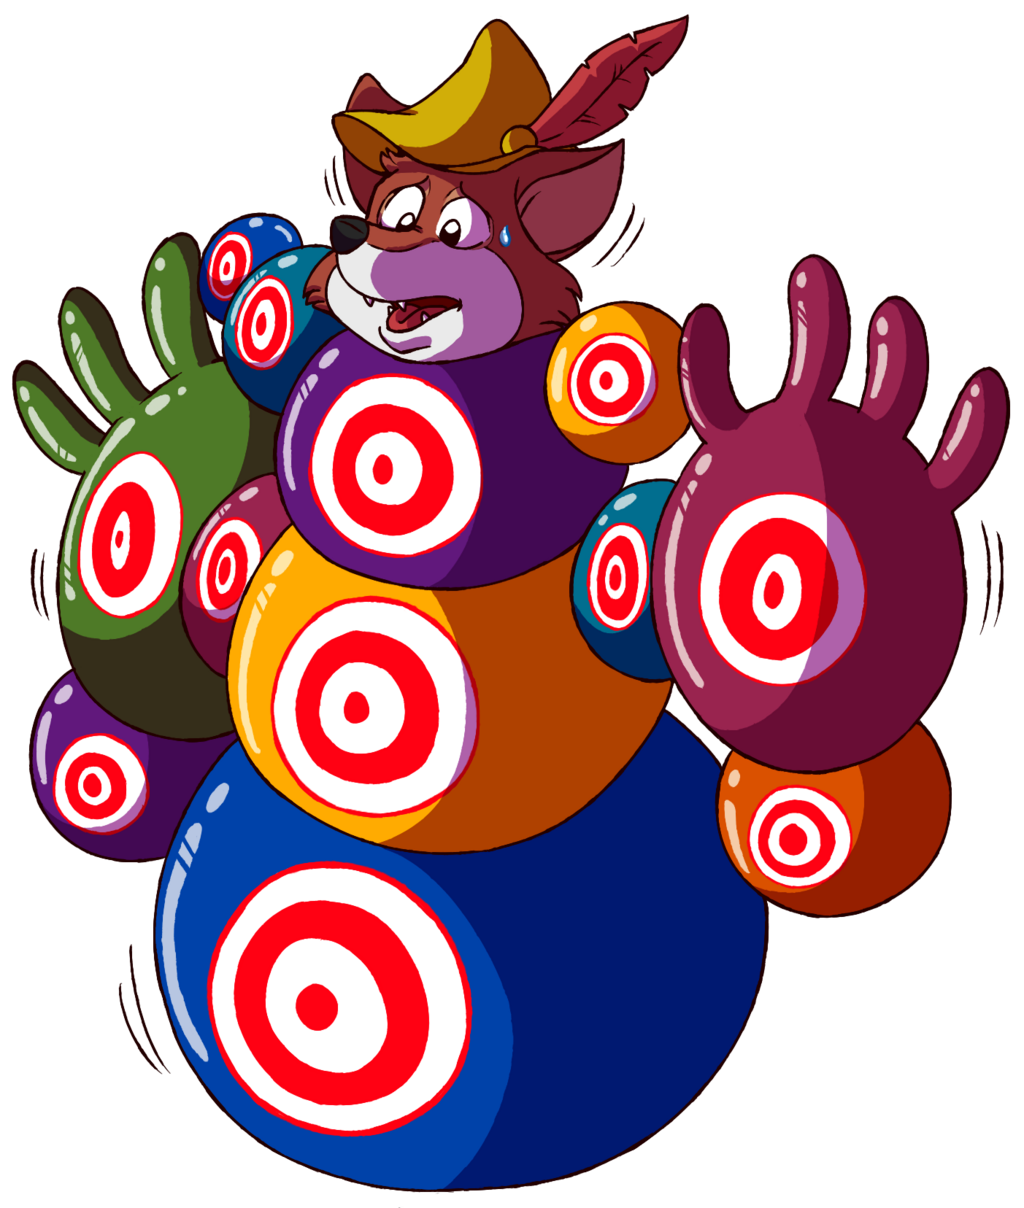 Commission - Target Practice